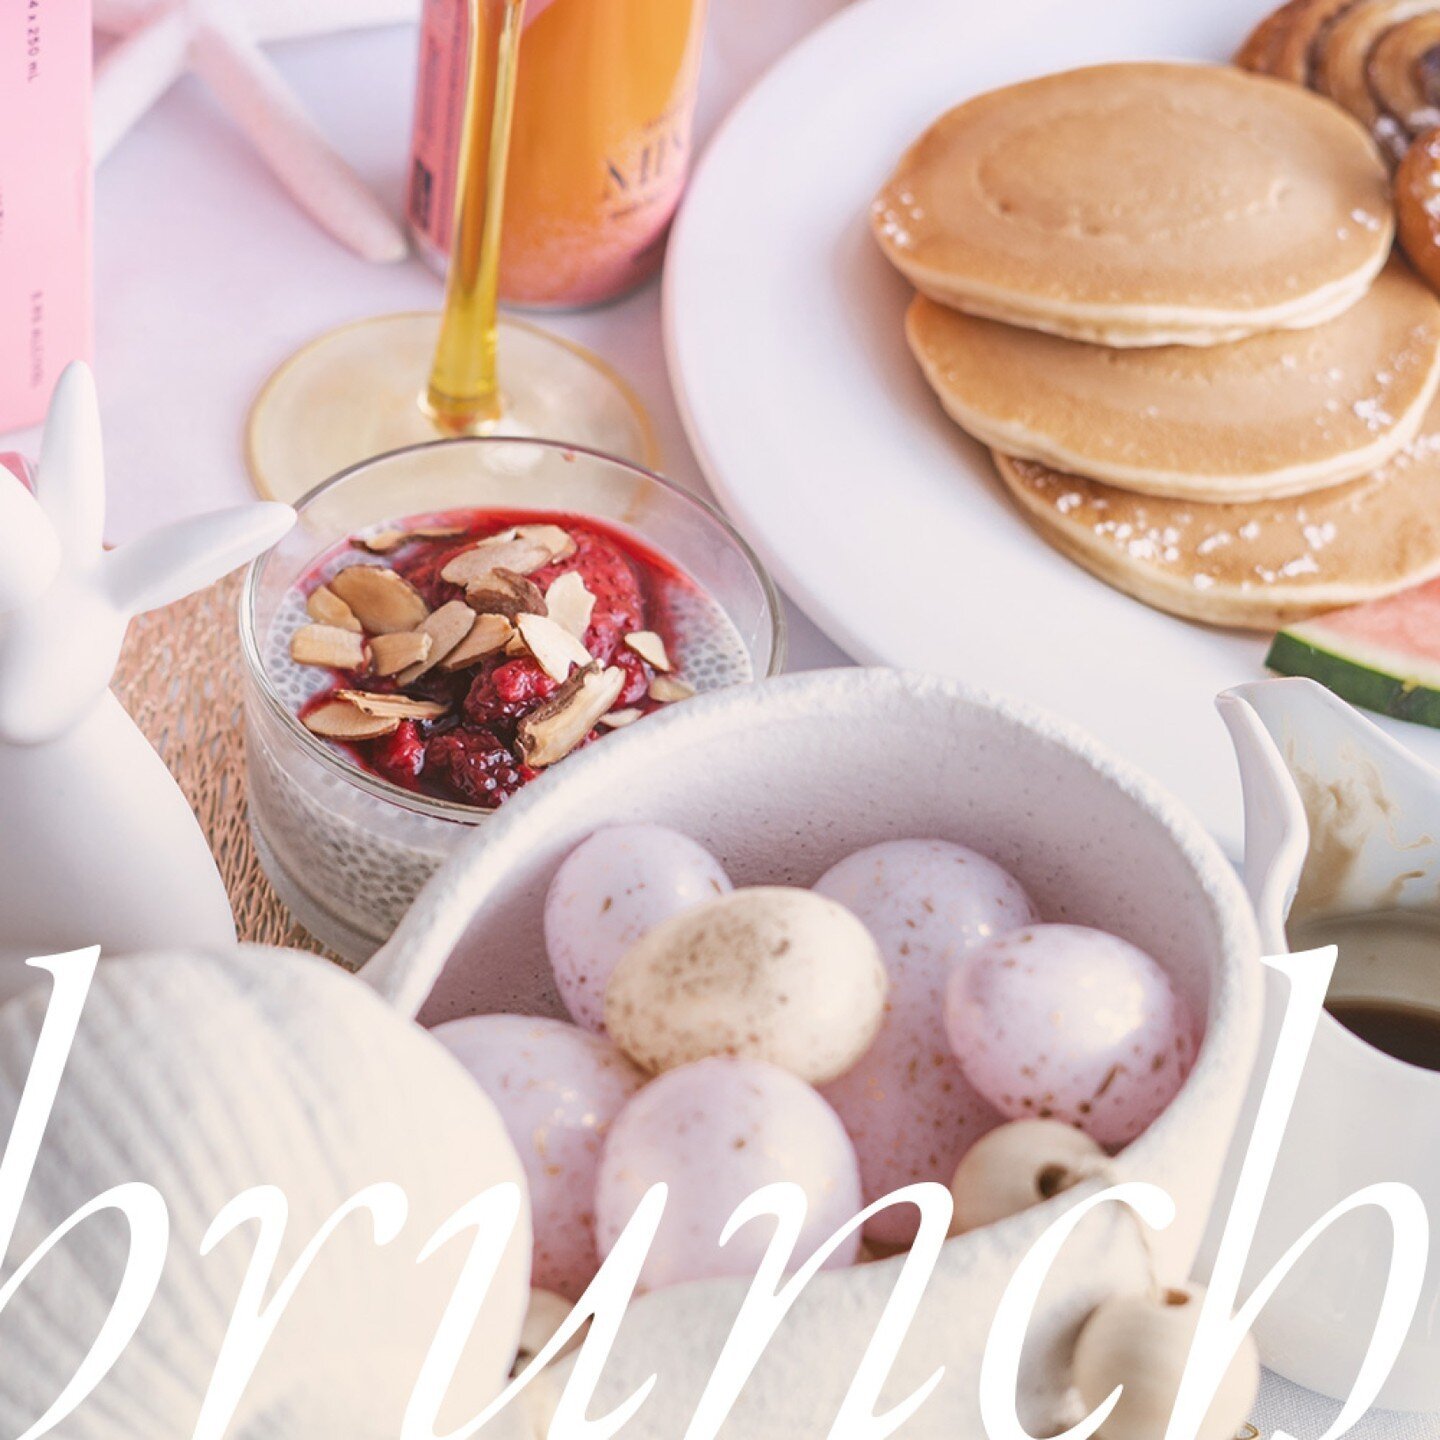 Brunch &ndash; that magical meeting point of breakfast and lunch, where lazy mornings meet delicious spreads. And what better way to elevate your brunch experience than with @drink_henlee Mimosa&rsquo;s. Get ready for the ultimate Easter brunch! So r